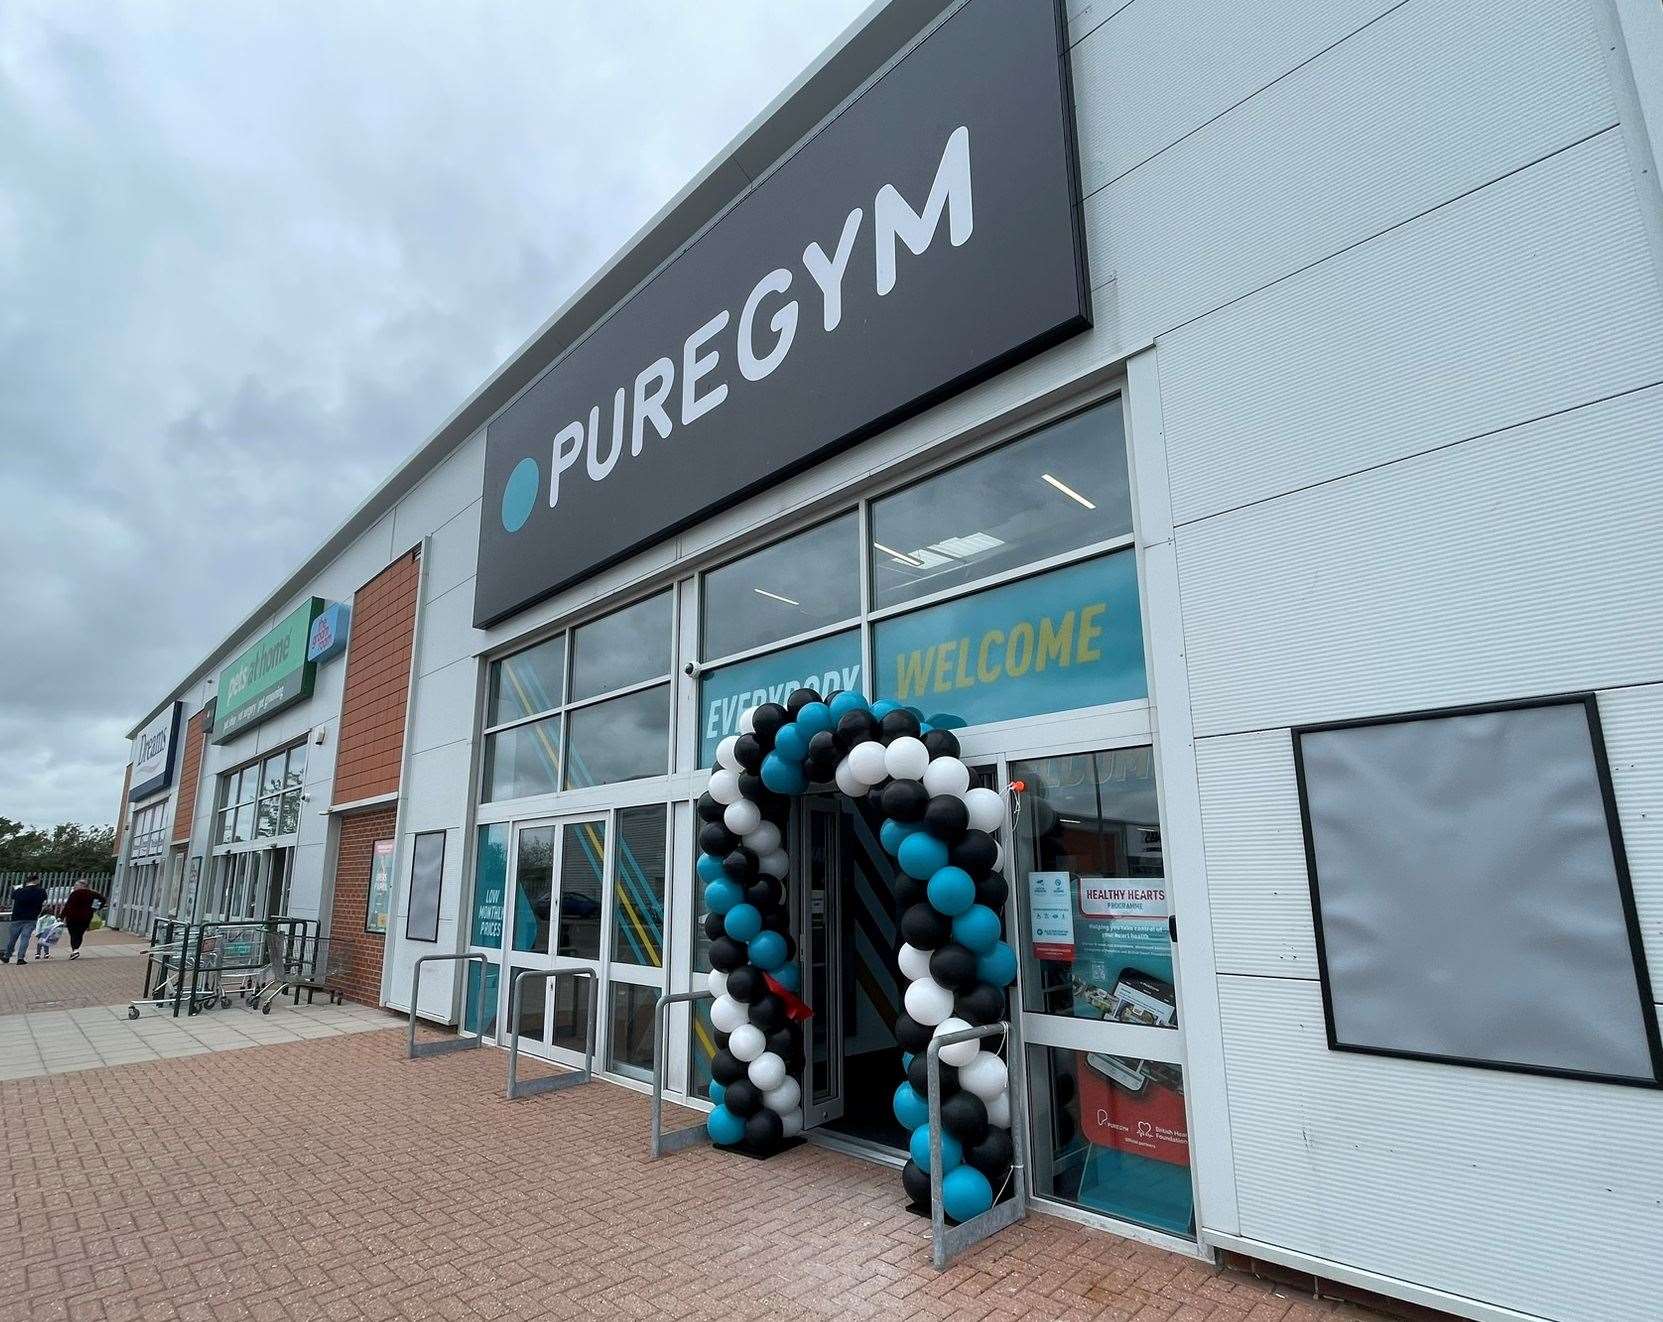 Sittingbourne PureGym is now open in the former Bensons For Beds store in Sittingbourne Retail Park